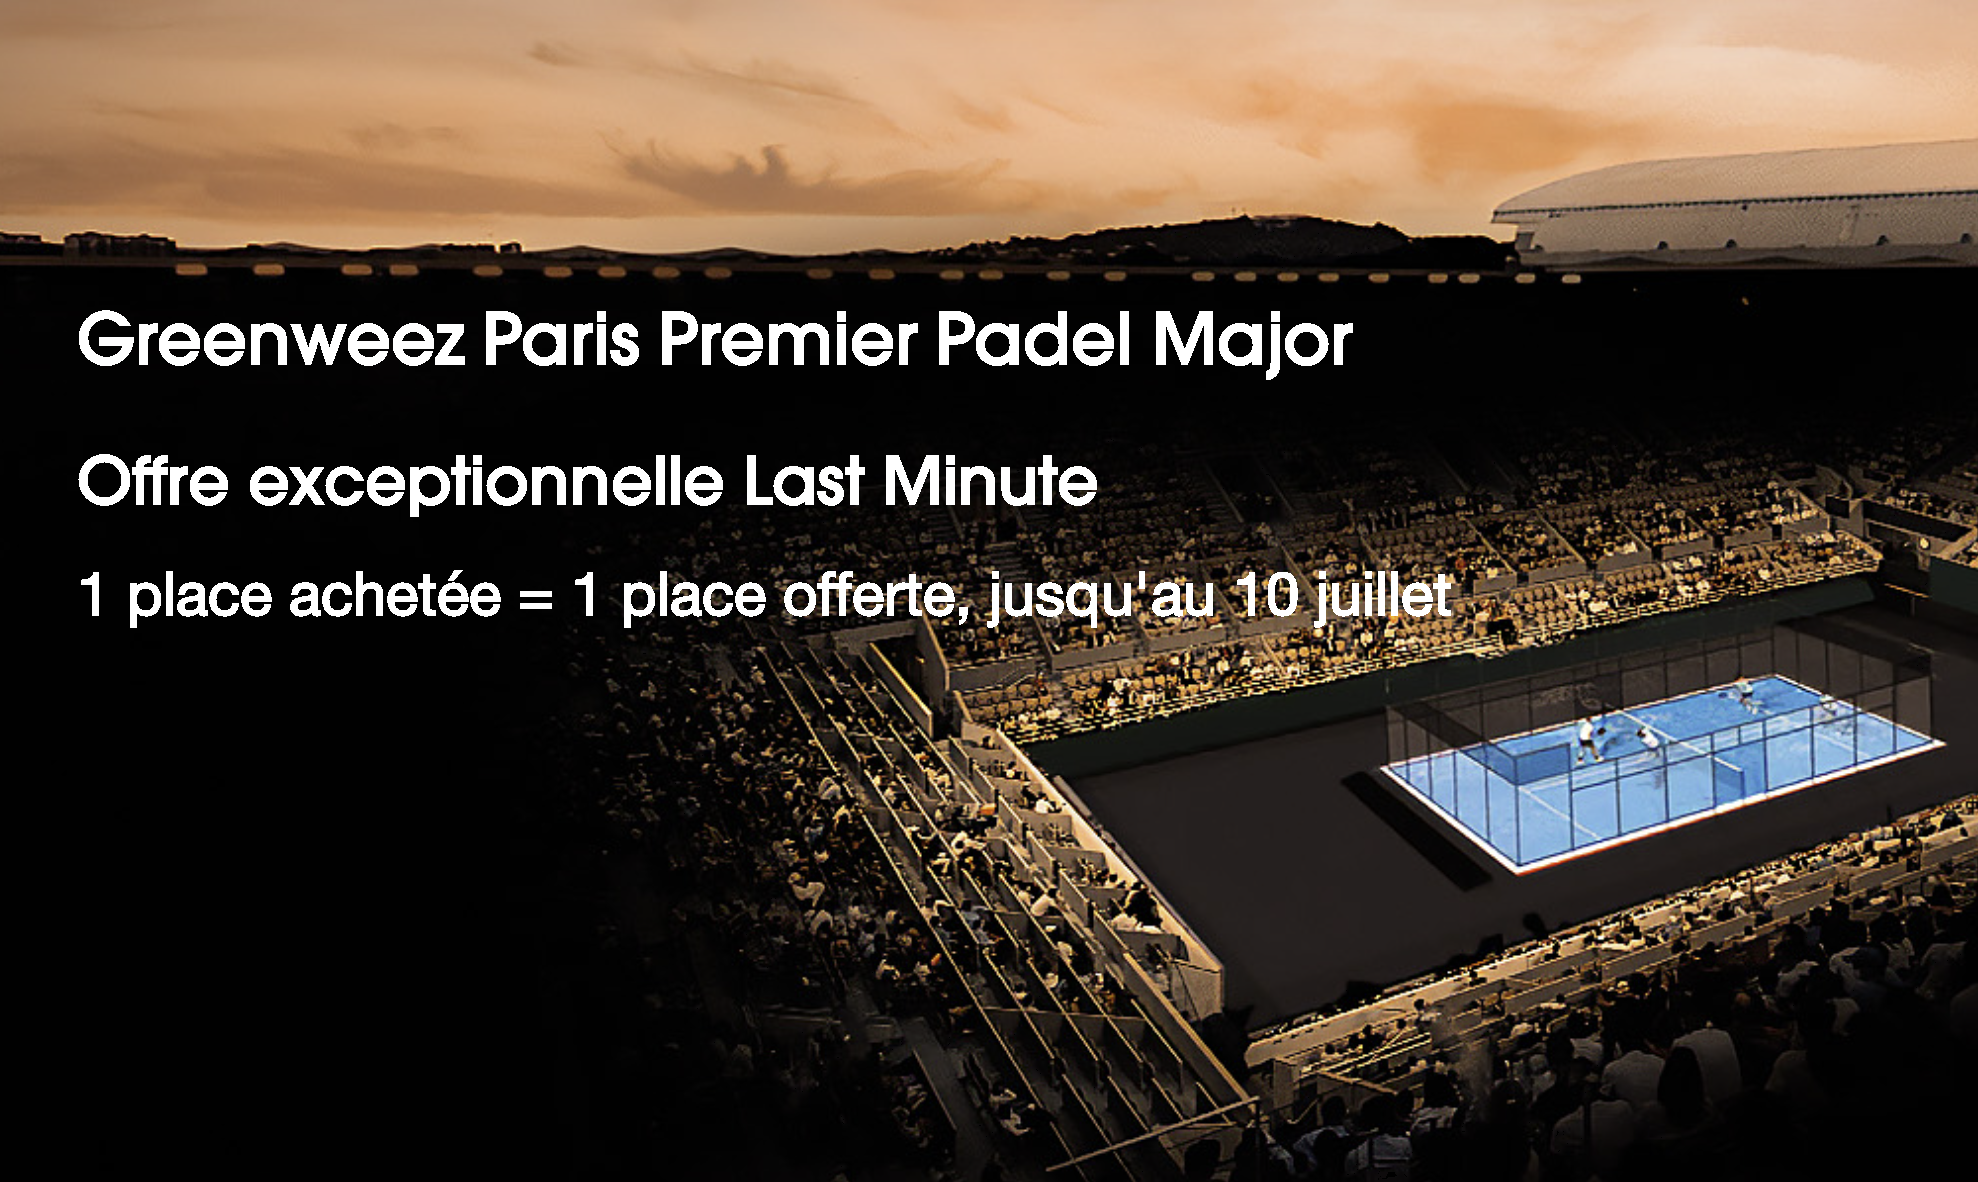 Greenweez Paris Premier Padel Major : one ticket offered for one ticket purchased